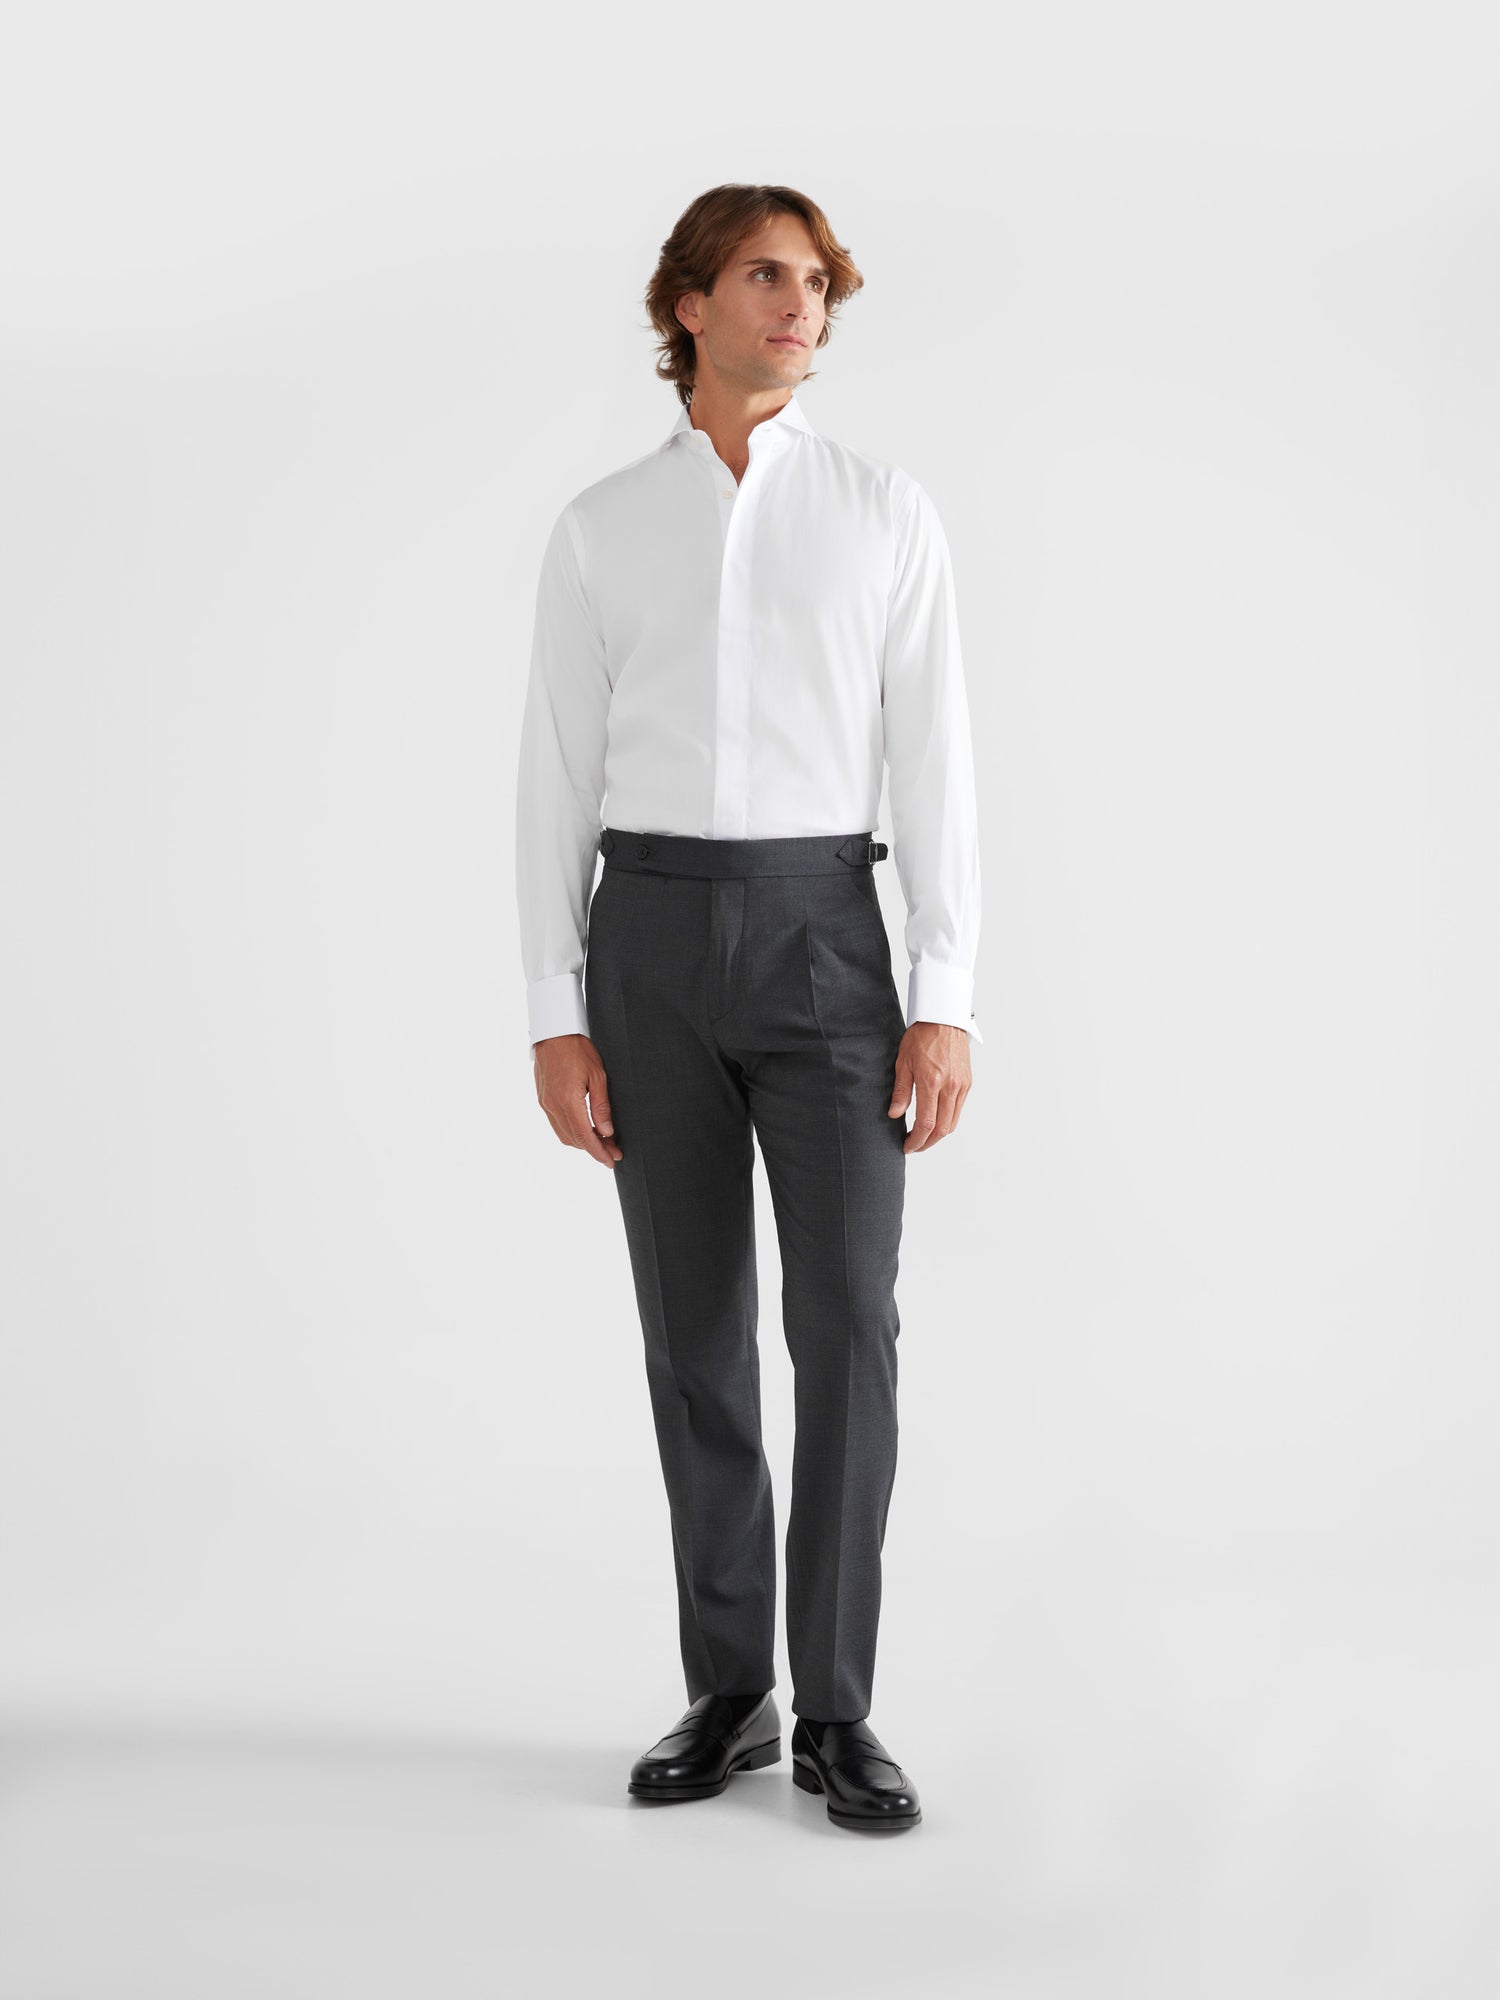 Charcoal gray extended dress pants